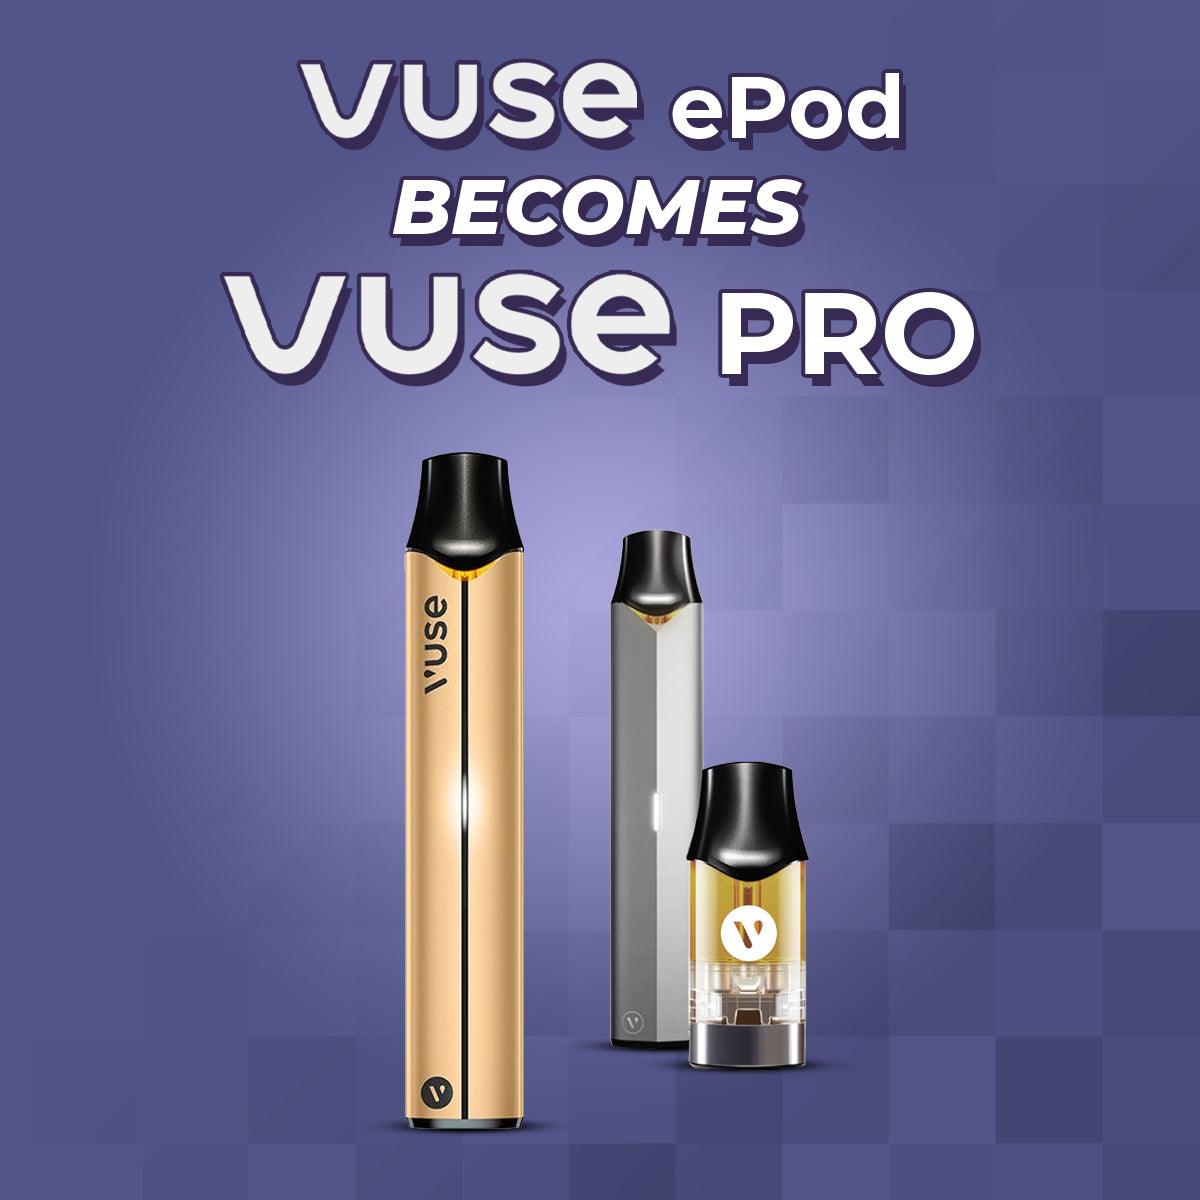 Vuse ePod to Vuse PRO: What’s the Difference?